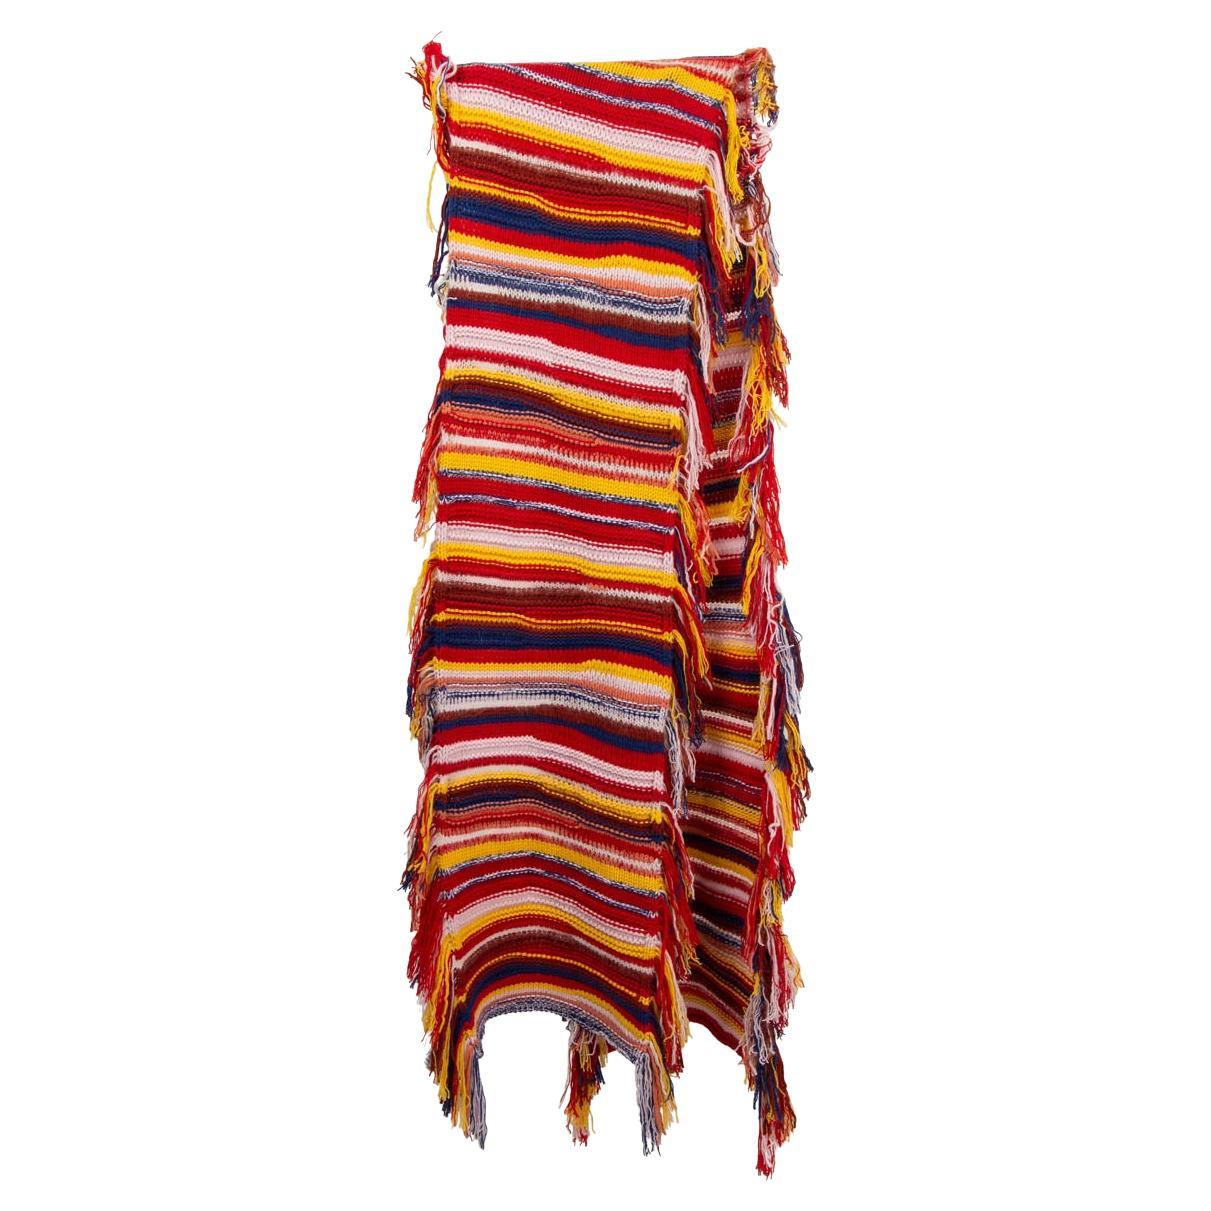 CHLOE red multicolor cashmere blend STRIPED FRINGED KNIT MUFFLER Scarf For Sale